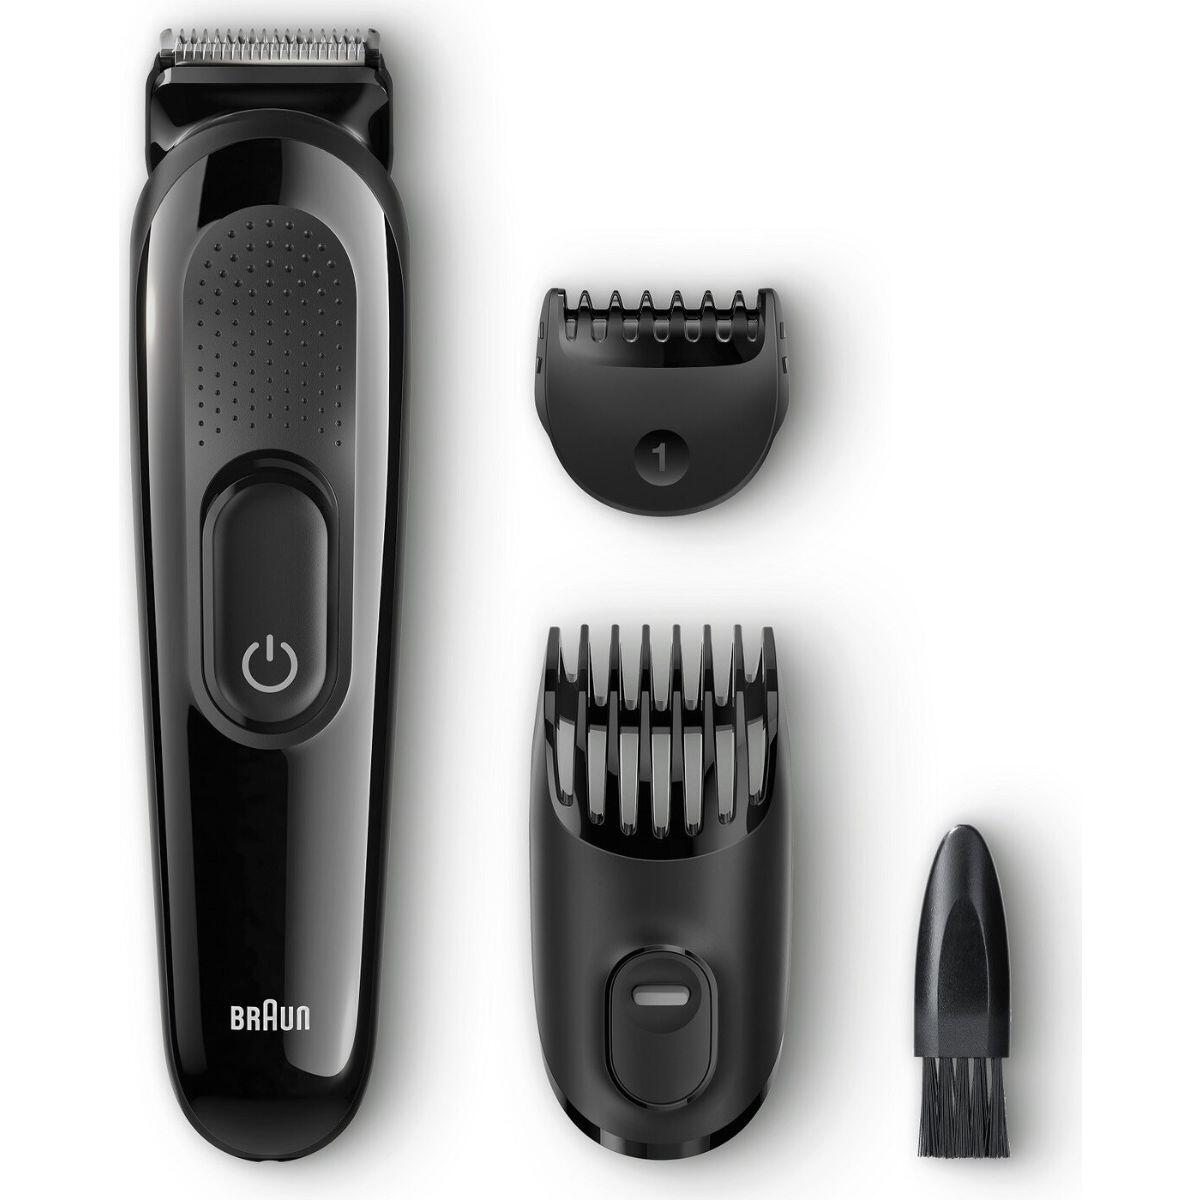 Braun Rechargeable Styling KIT 3-In-1 Trimmer For Men Shaving / Trimming, SK2000